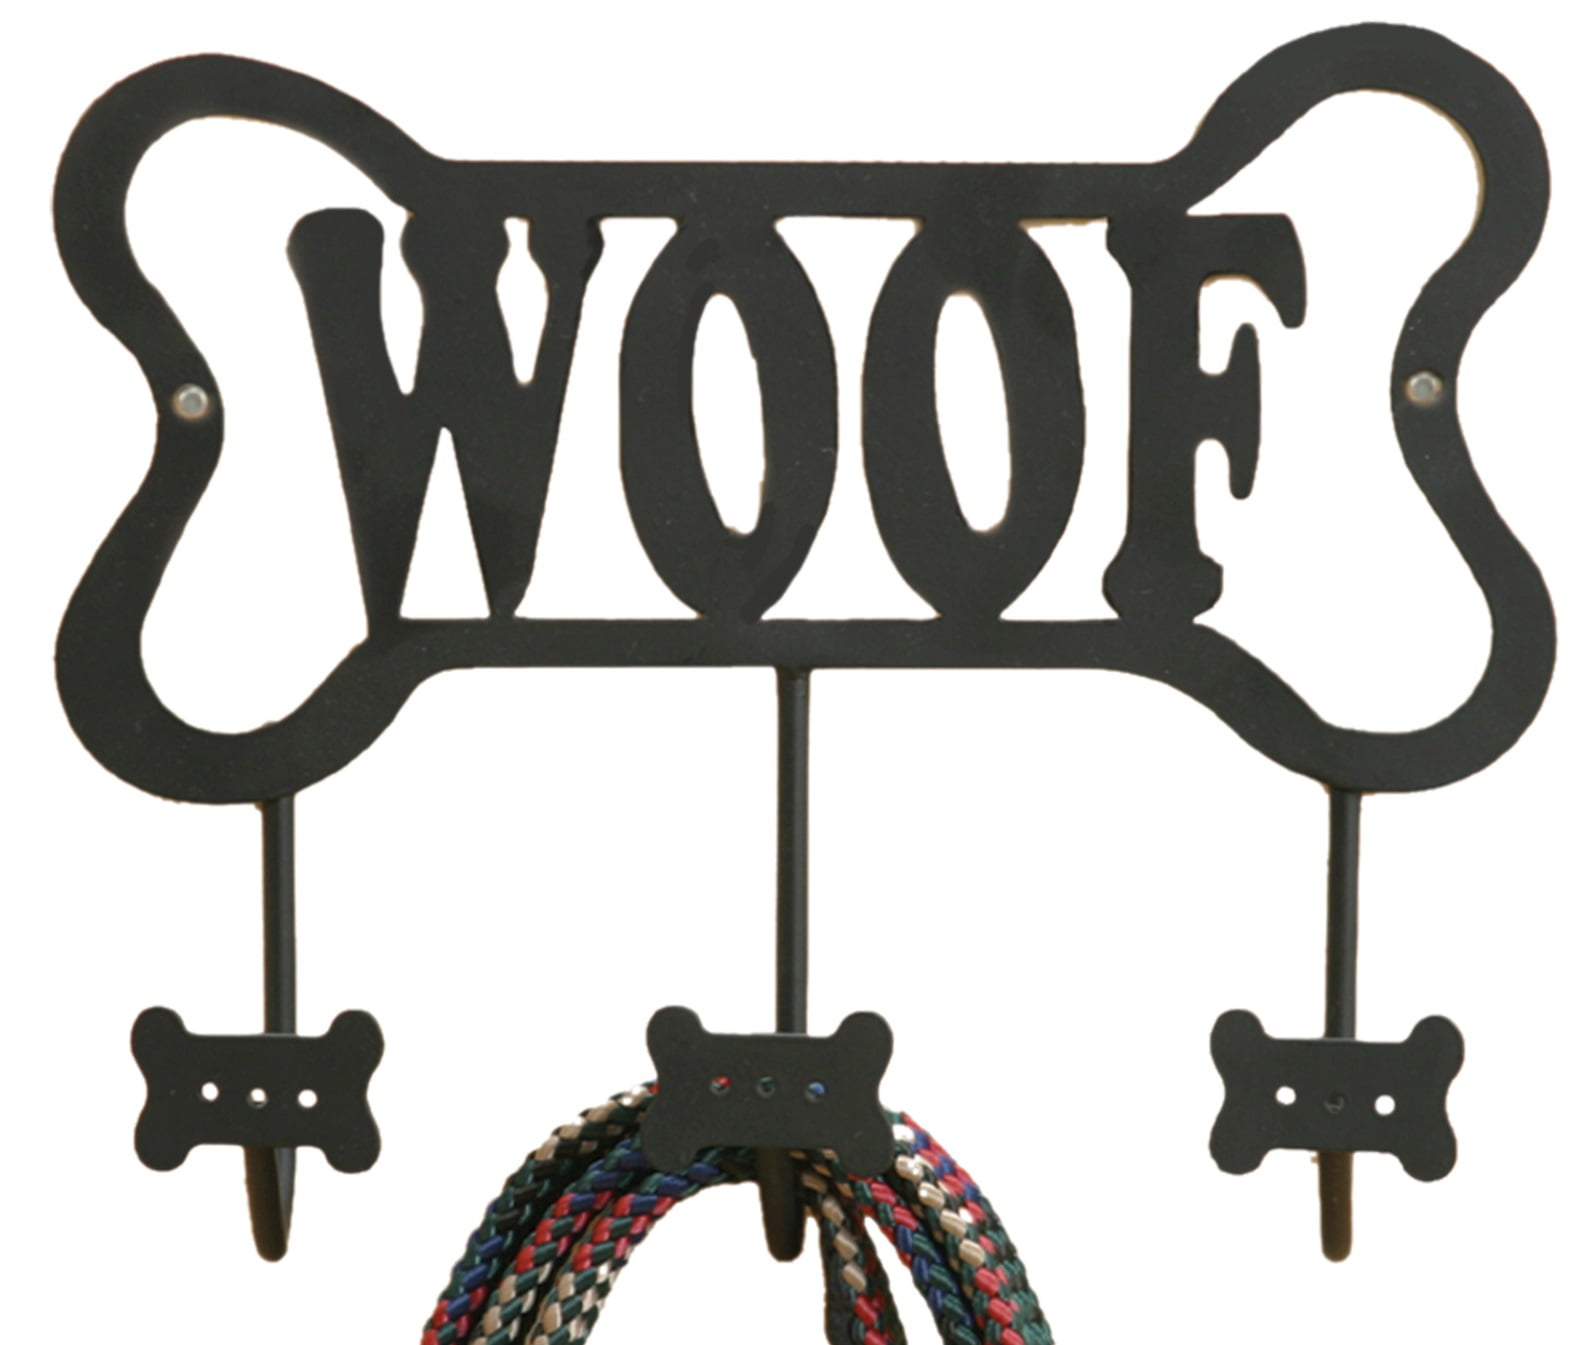 Dark Lead or Leash Holder Rack With 4 Hooks Obique Pets Collection Wooden Bone Shaped Key